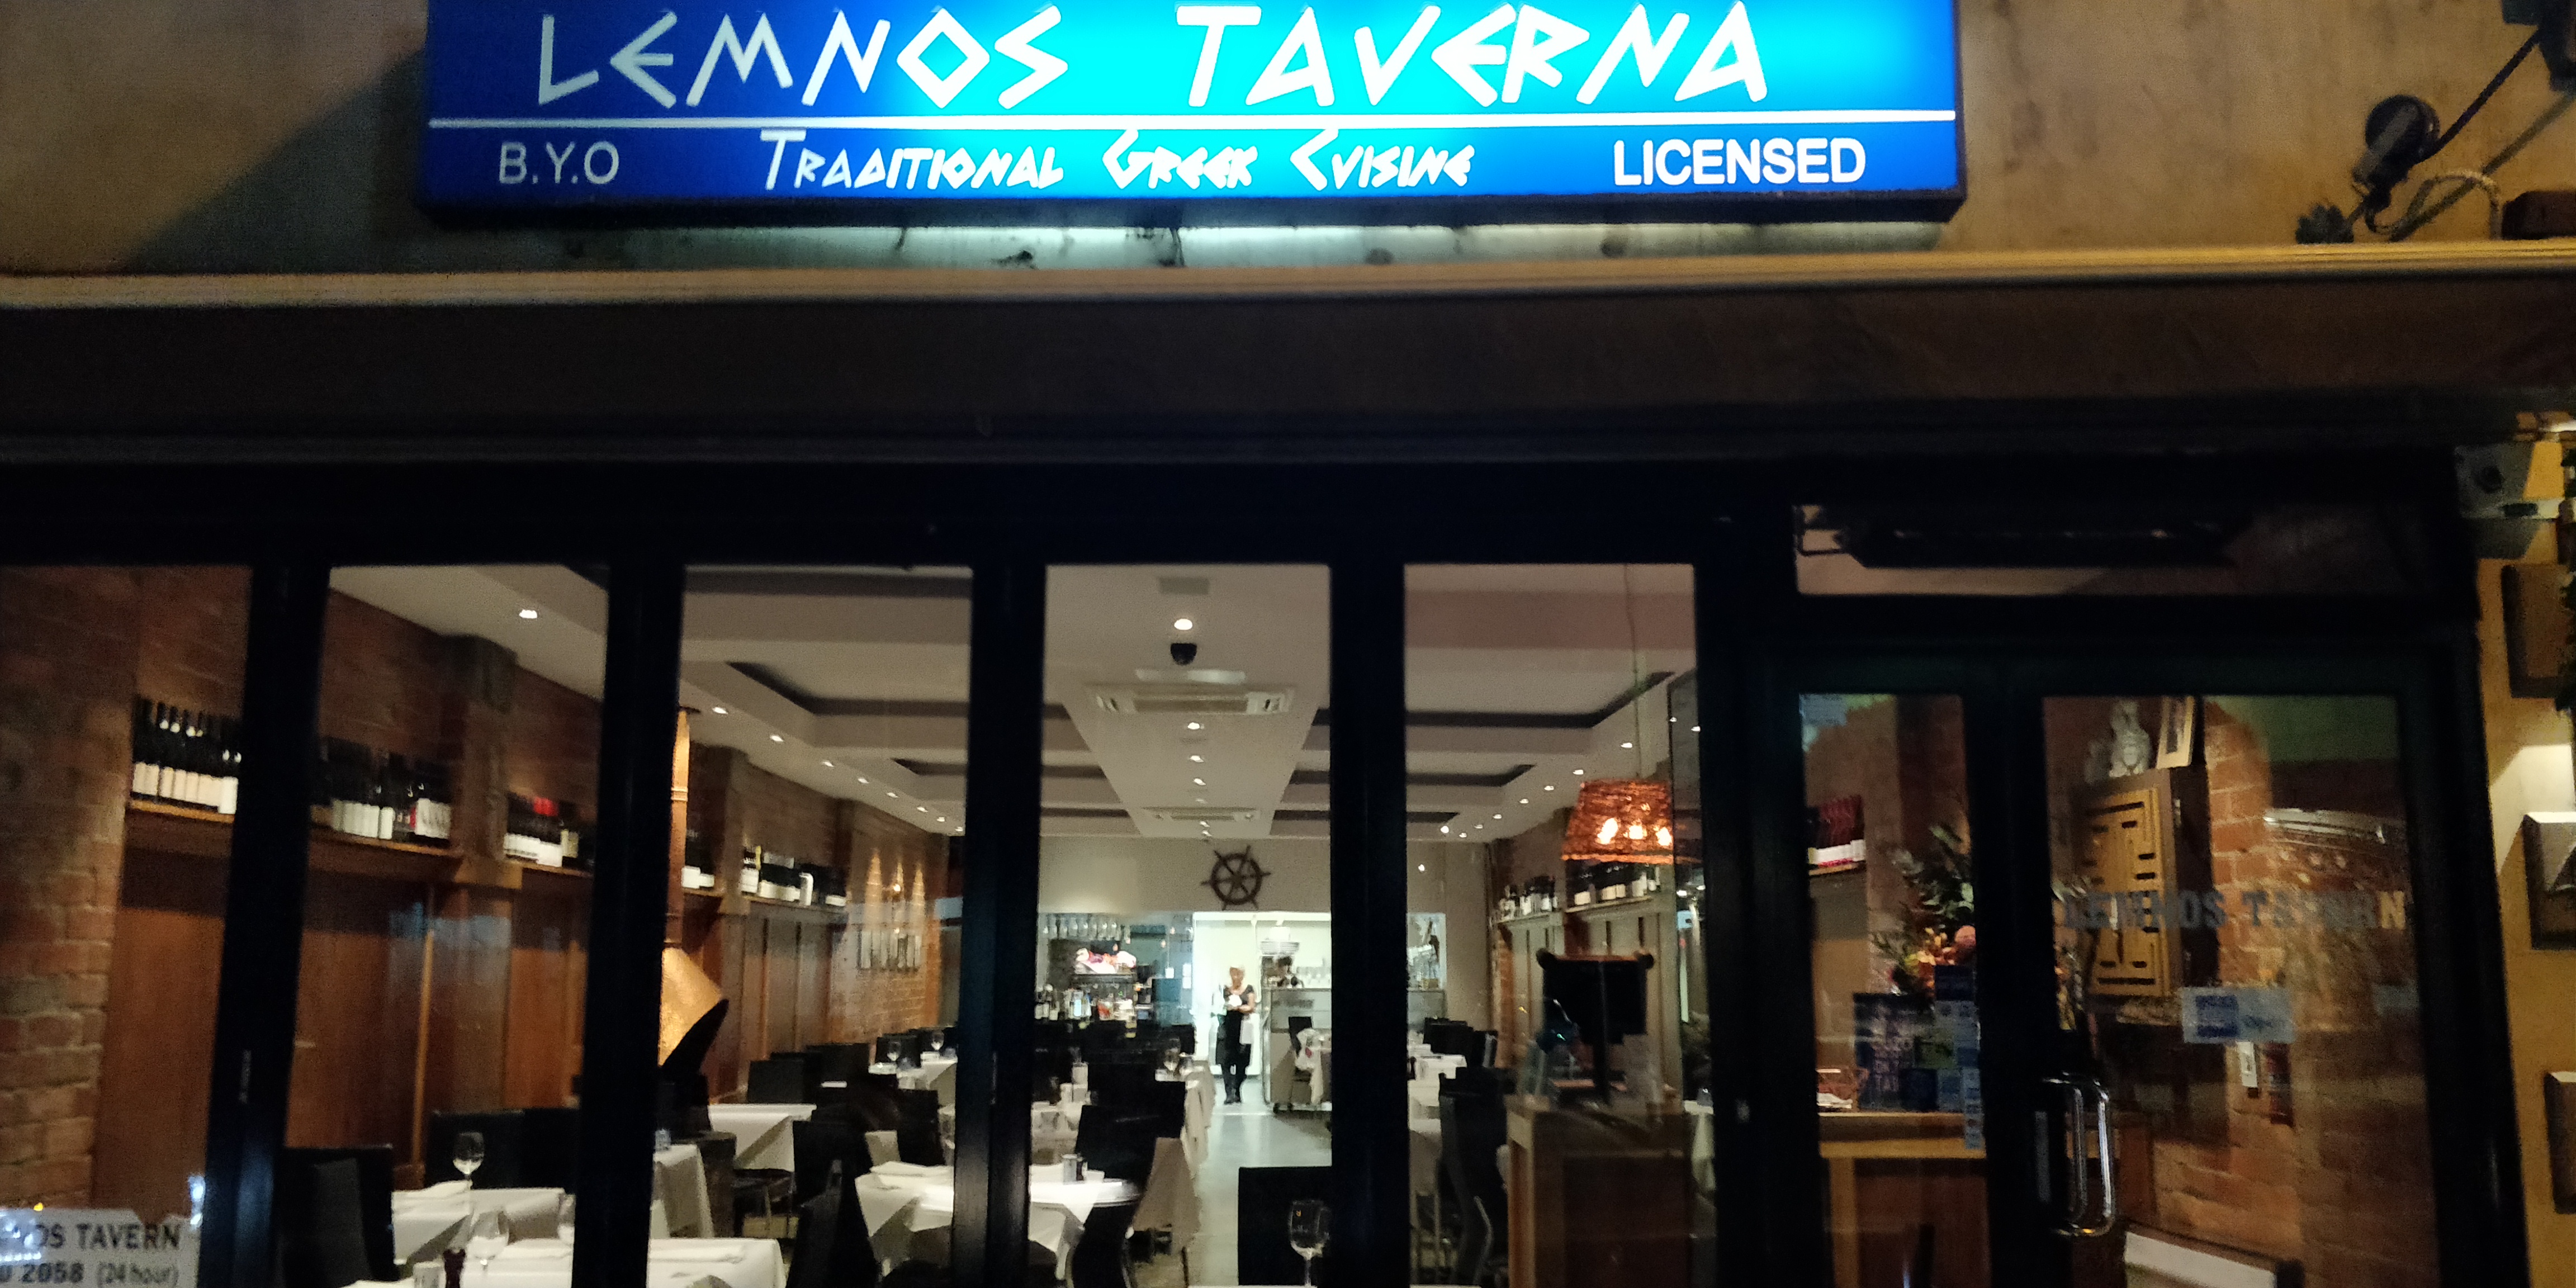 A PICTURE OF LEMNOS TAVERNA